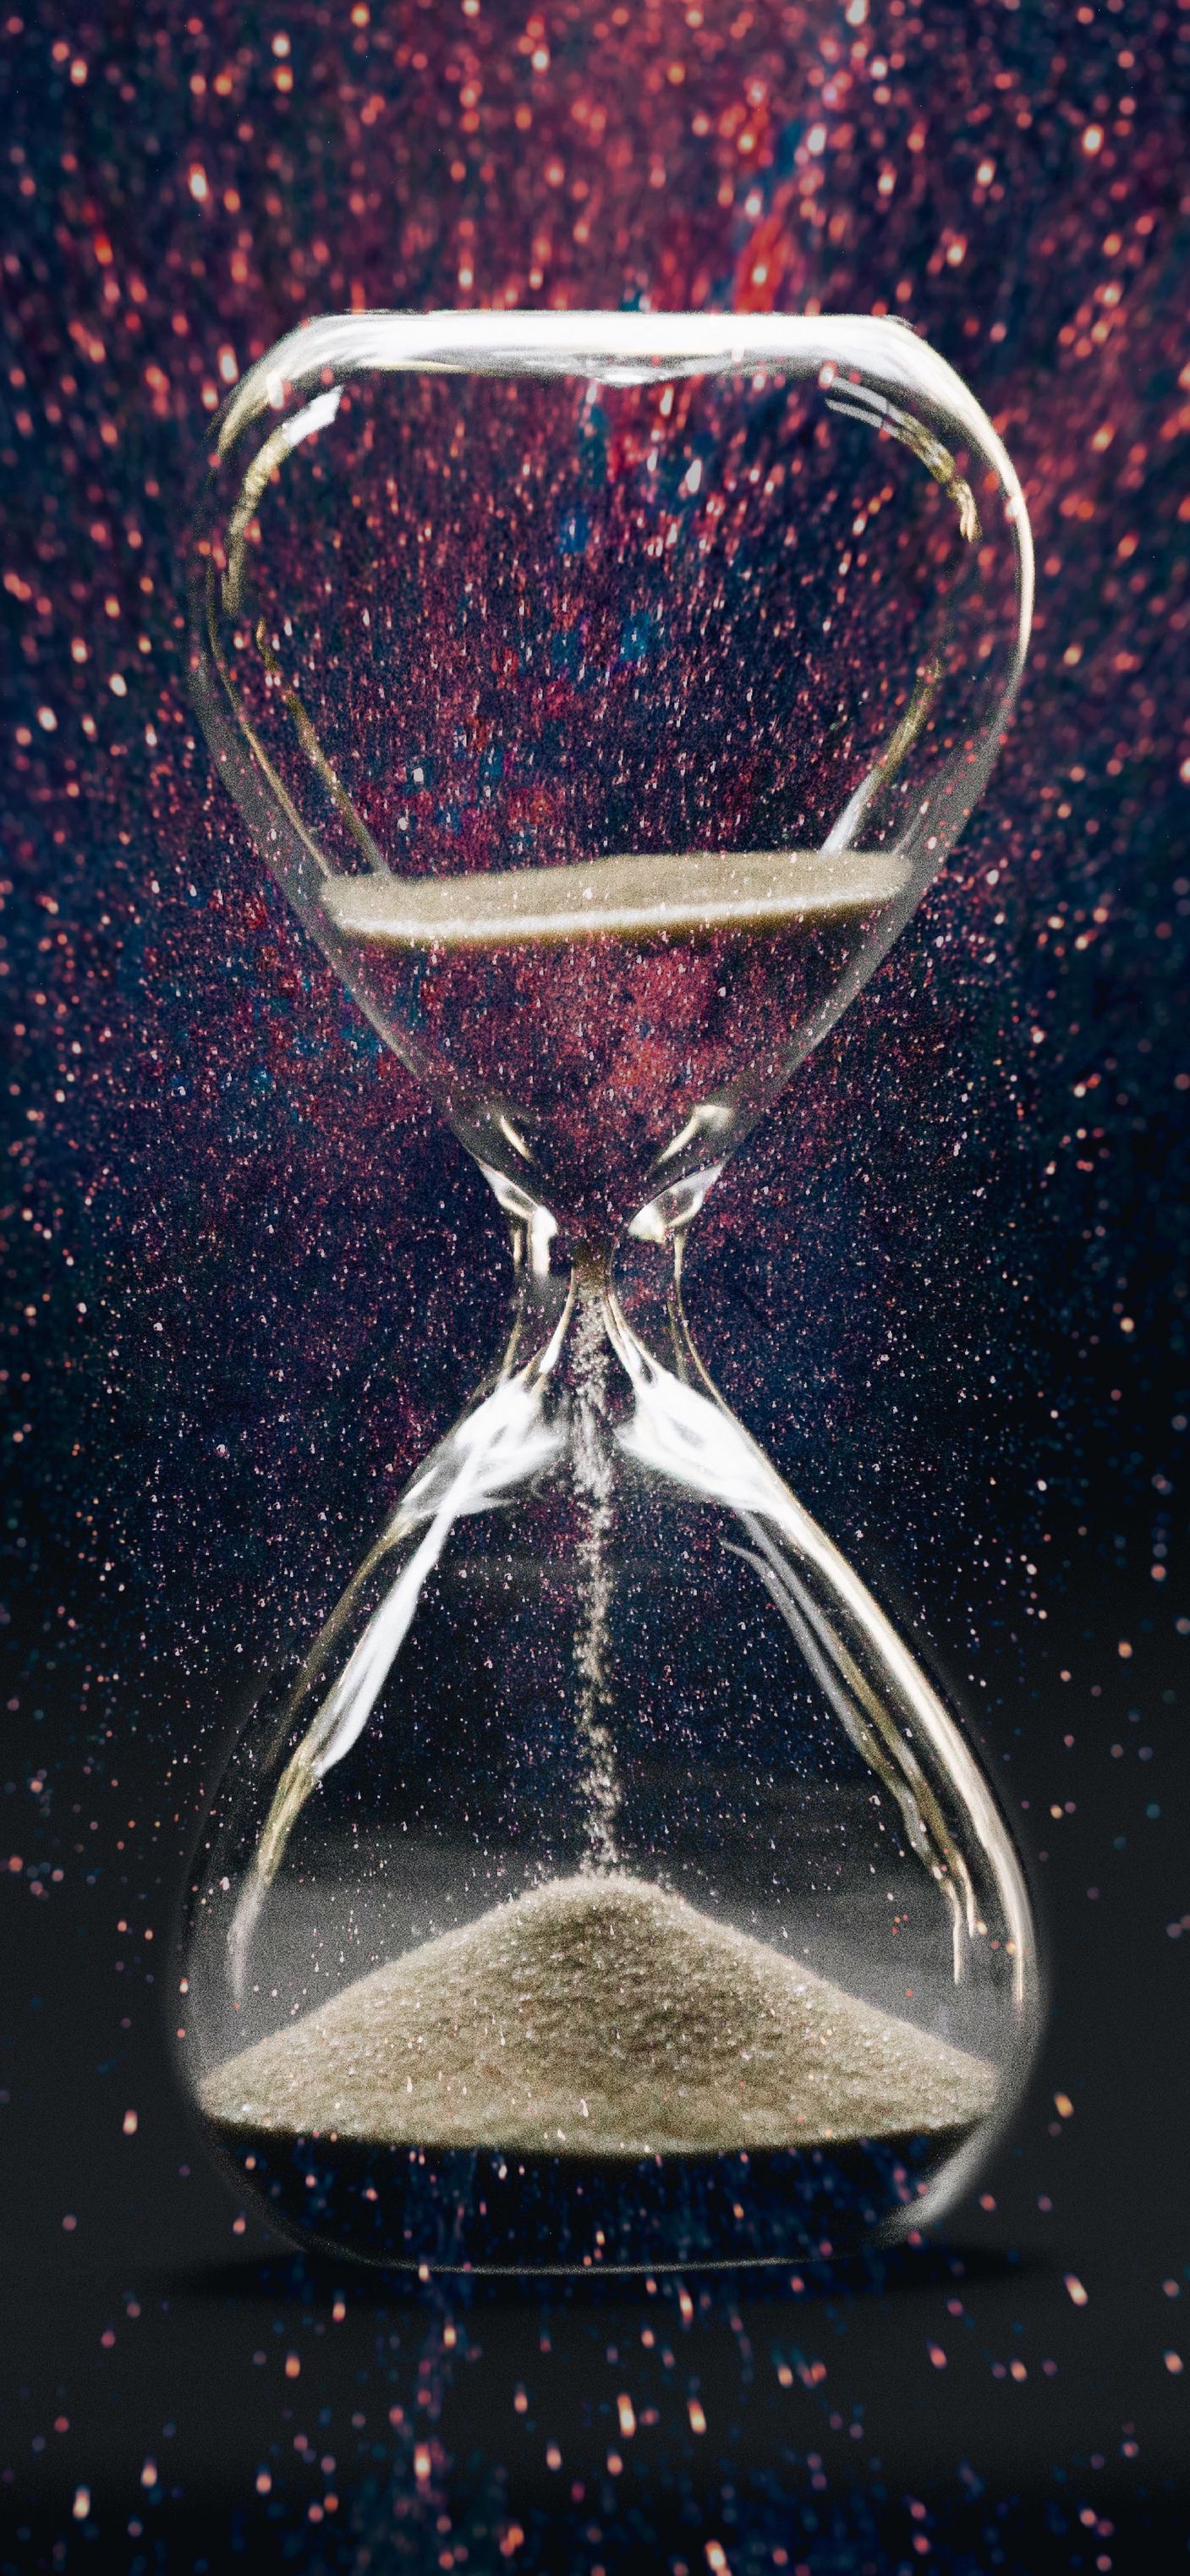 Hourglass Images  Free Photos PNG Stickers Wallpapers  Backgrounds   rawpixel